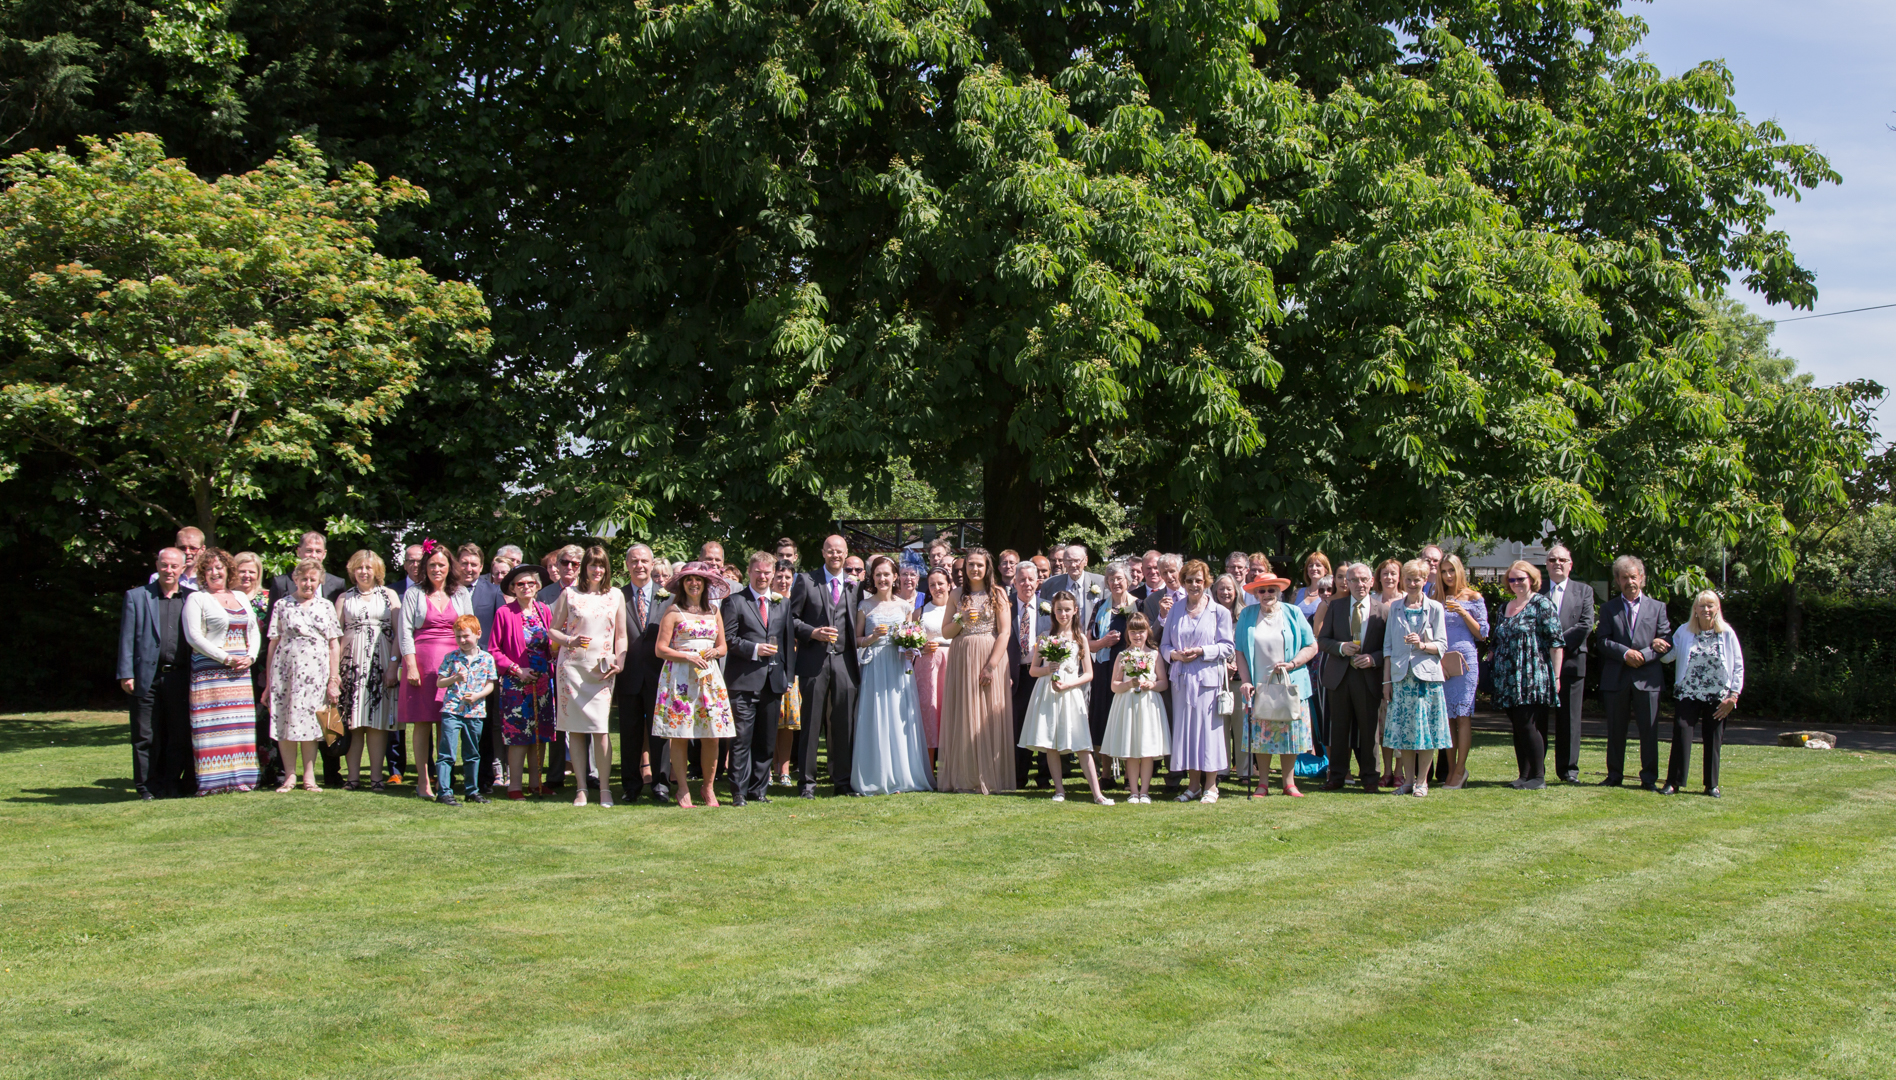 The Big Group Shot for Phil & Julie at The Cavendish in Eastcote, Middlesex by Tim Durham of Pinner Wedding Photography. Wedding photographer in Harrow and wedding photographer in Ruislip.